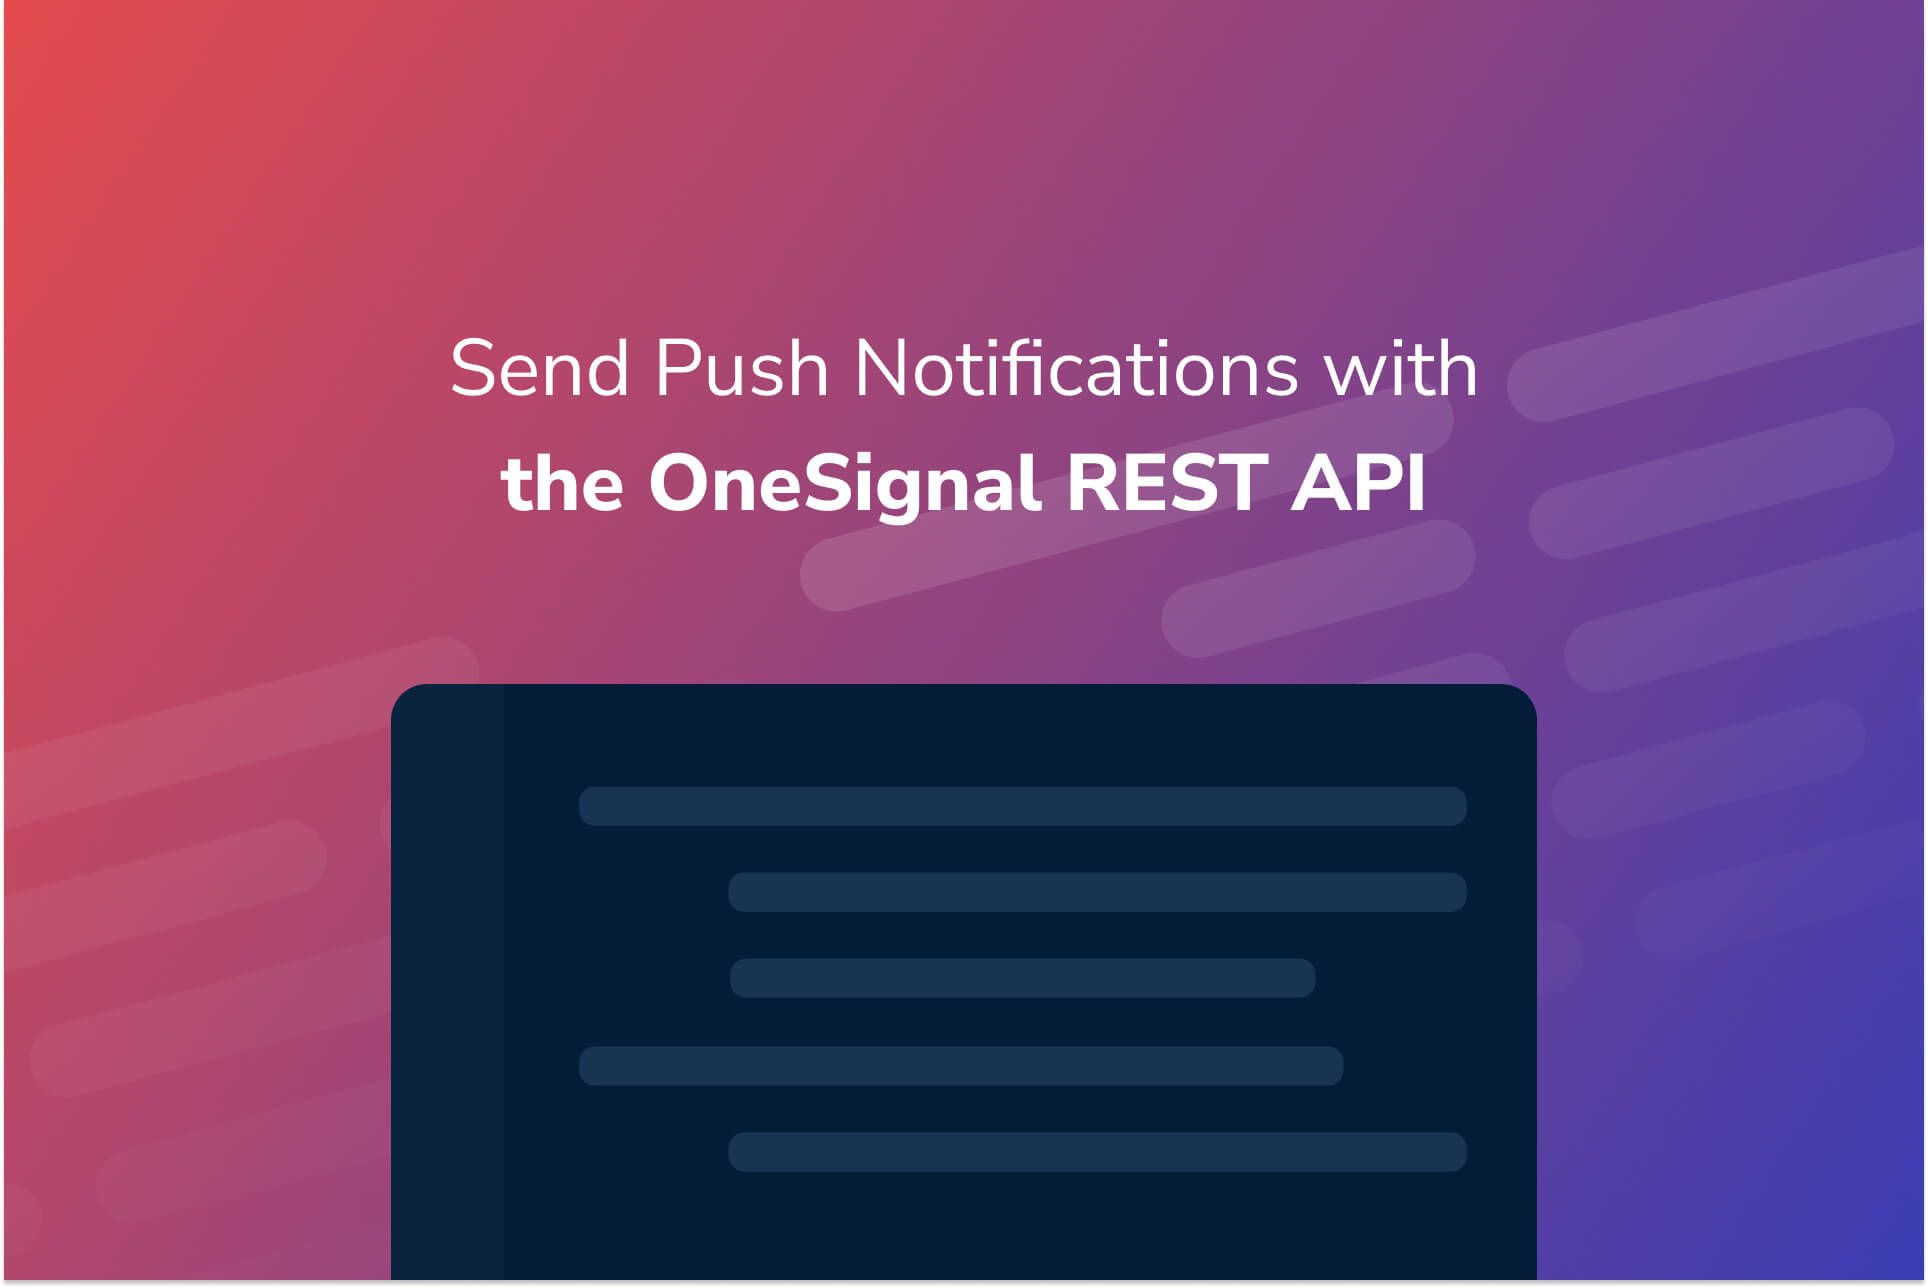 How to Send Push Notifications with the OneSignal REST API